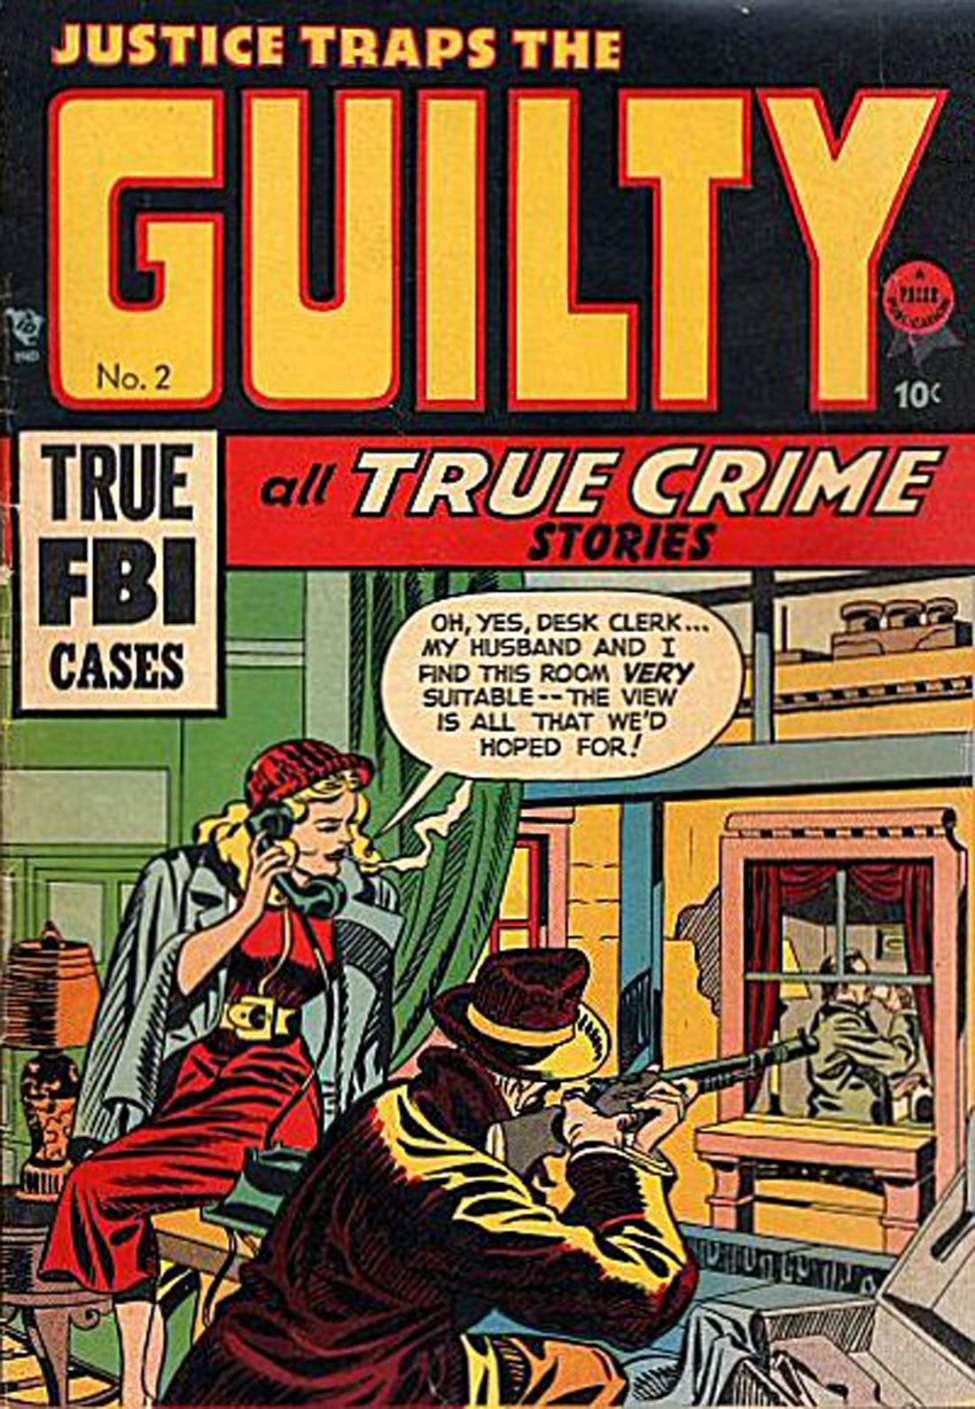 Justice Traps the Guilty v1 #2, Prize Comics